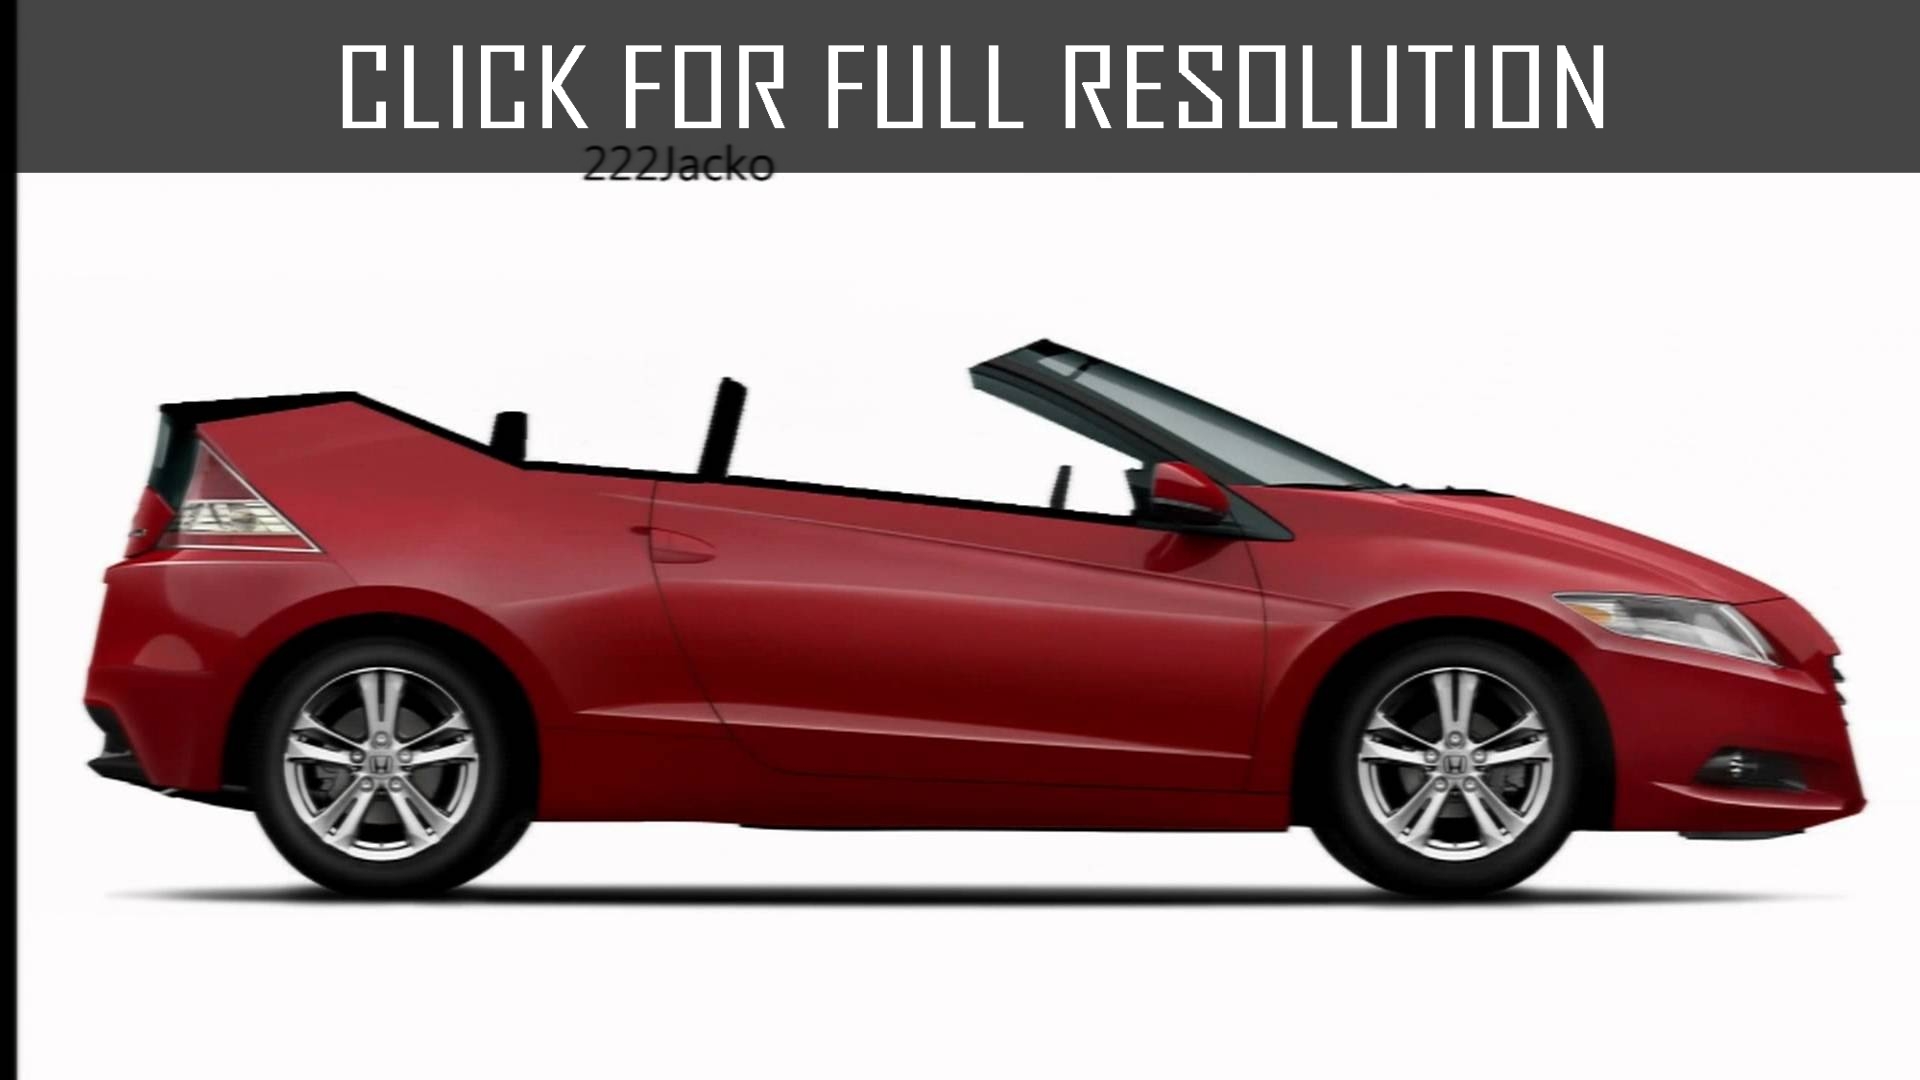 Honda Crz Convertible Amazing Photo Gallery Some Information And